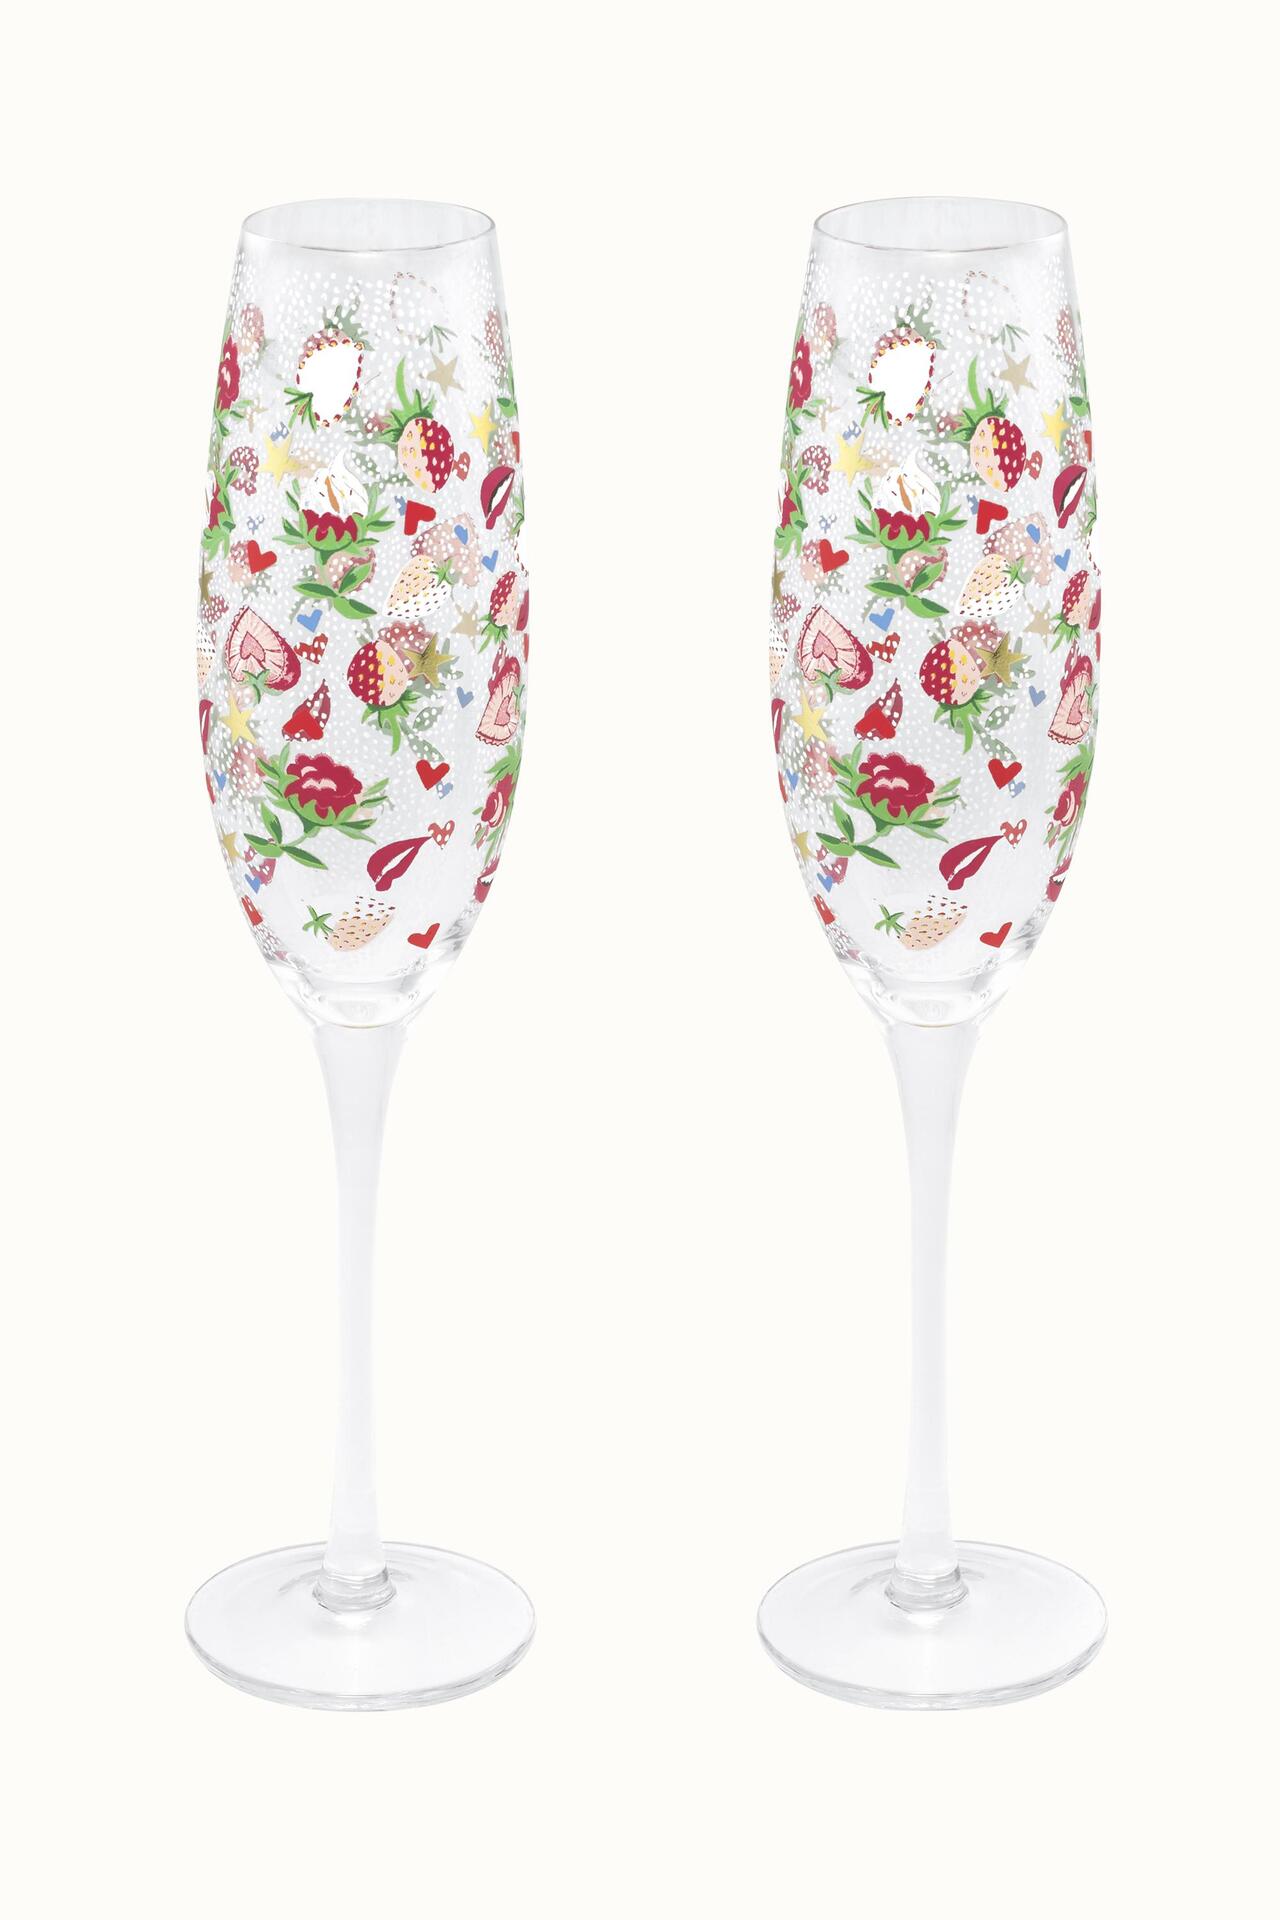 Cath Kidston GBBO Showstopper Ditsy Set of 2 Champagne Flutes in Cream/pink